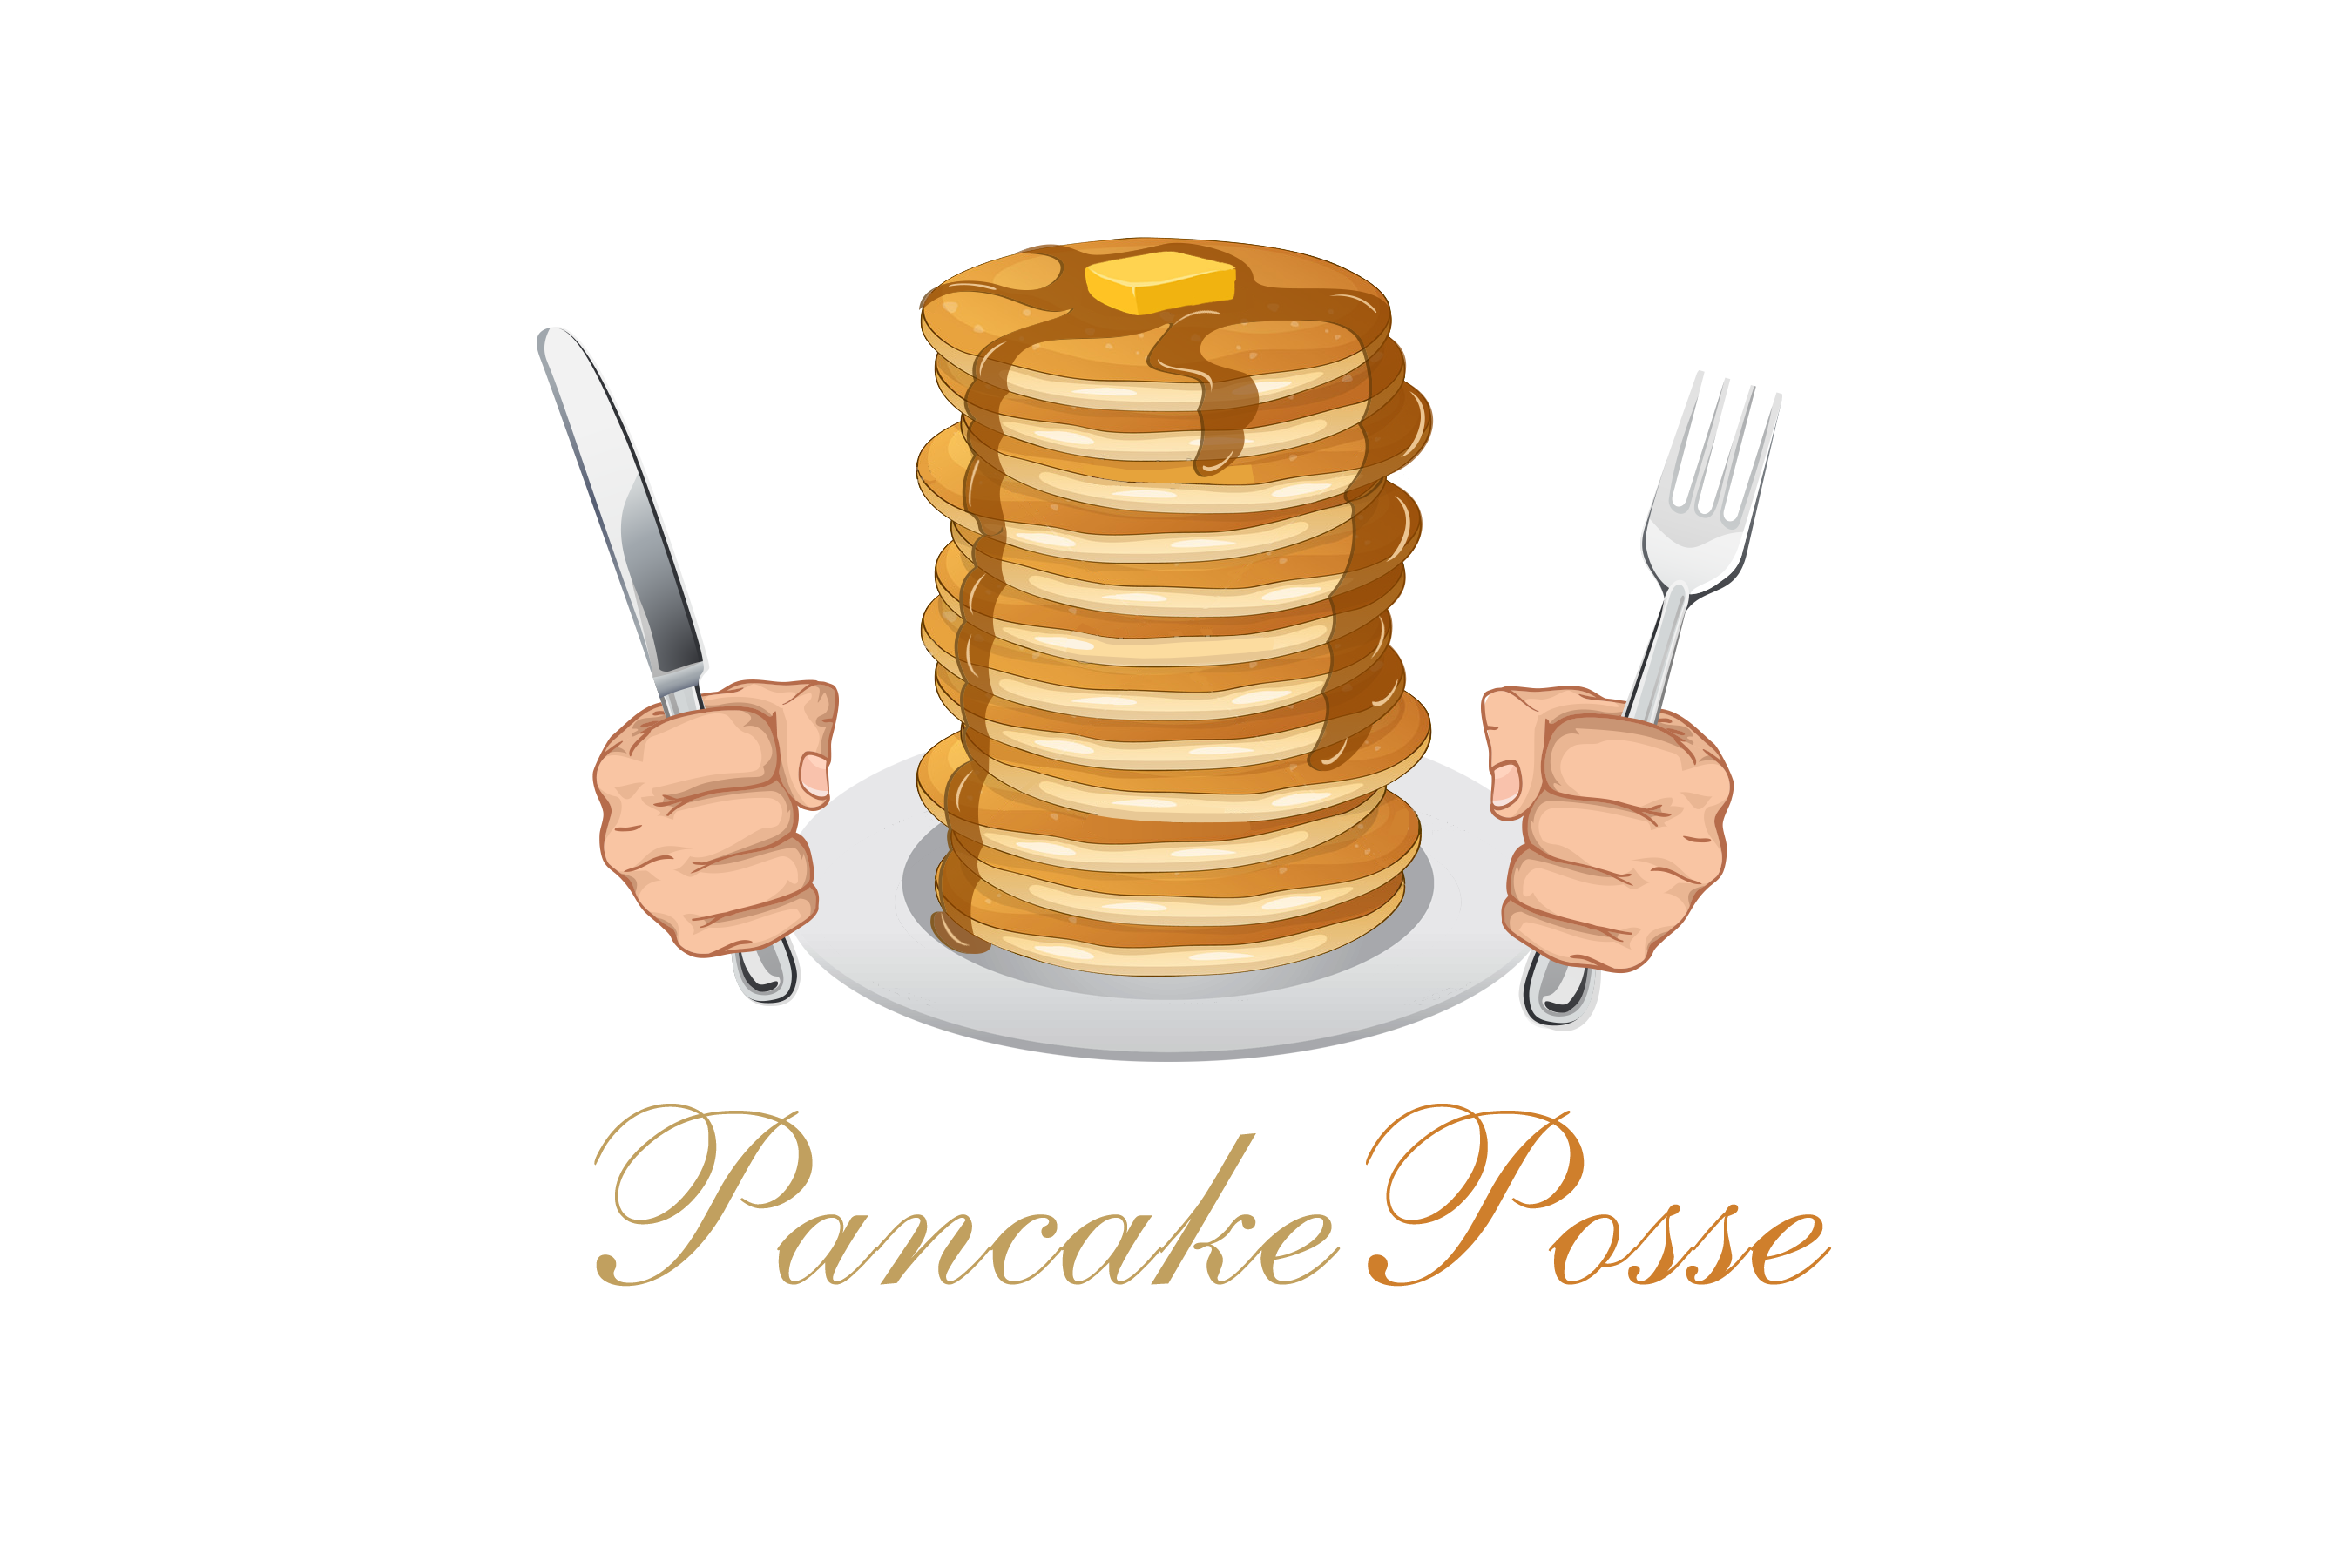 pancakes clipart cooked breakfast